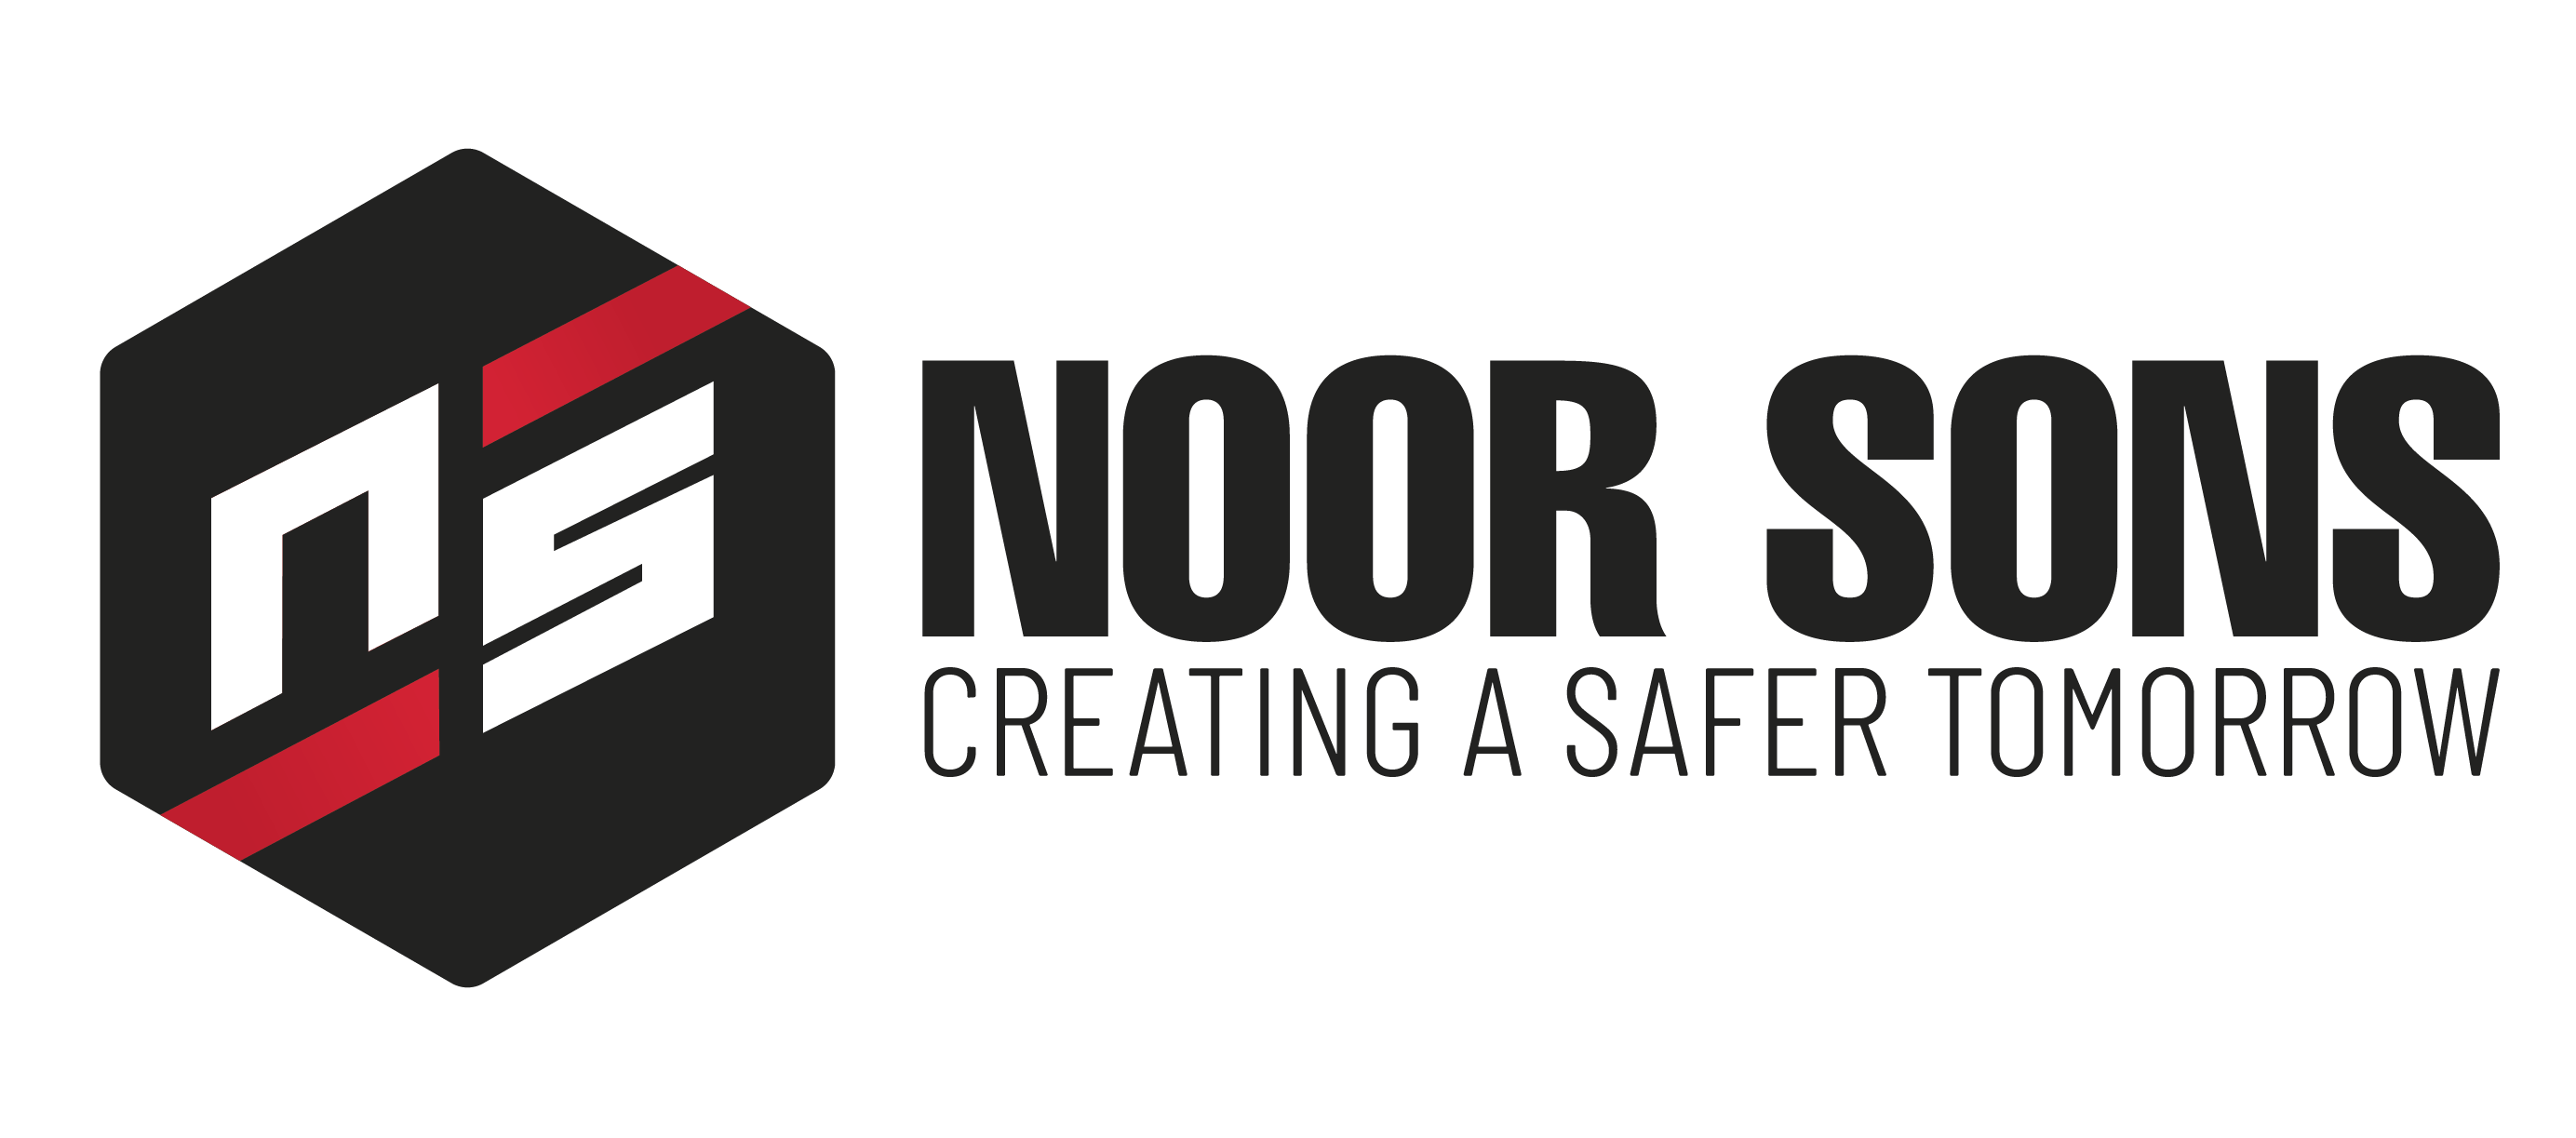 Noor Sons - Creating a Safer Tomorrow, Business Logo.